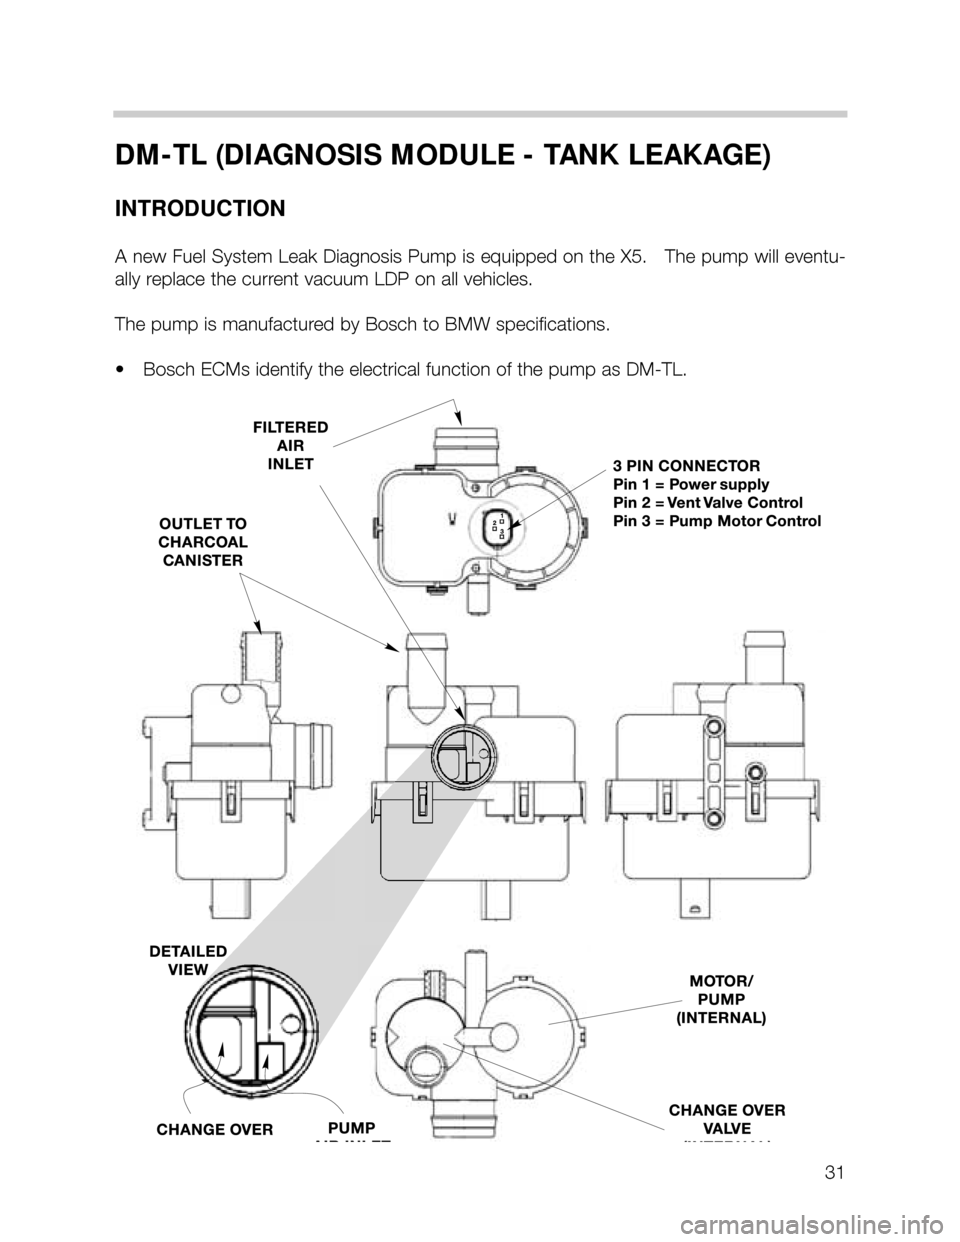 BMW X5 1999 E53 M62TU Engine Workshop Manual 31
DM-TL (DIAGNOSIS MODULE - TANK LEAKAGE)
INTRODUCTION
A new Fuel System Leak Diagnosis Pump is equipped on the X5.   The pump will eventu-
ally replace the current vacuum LDP on all vehicles.
The pu